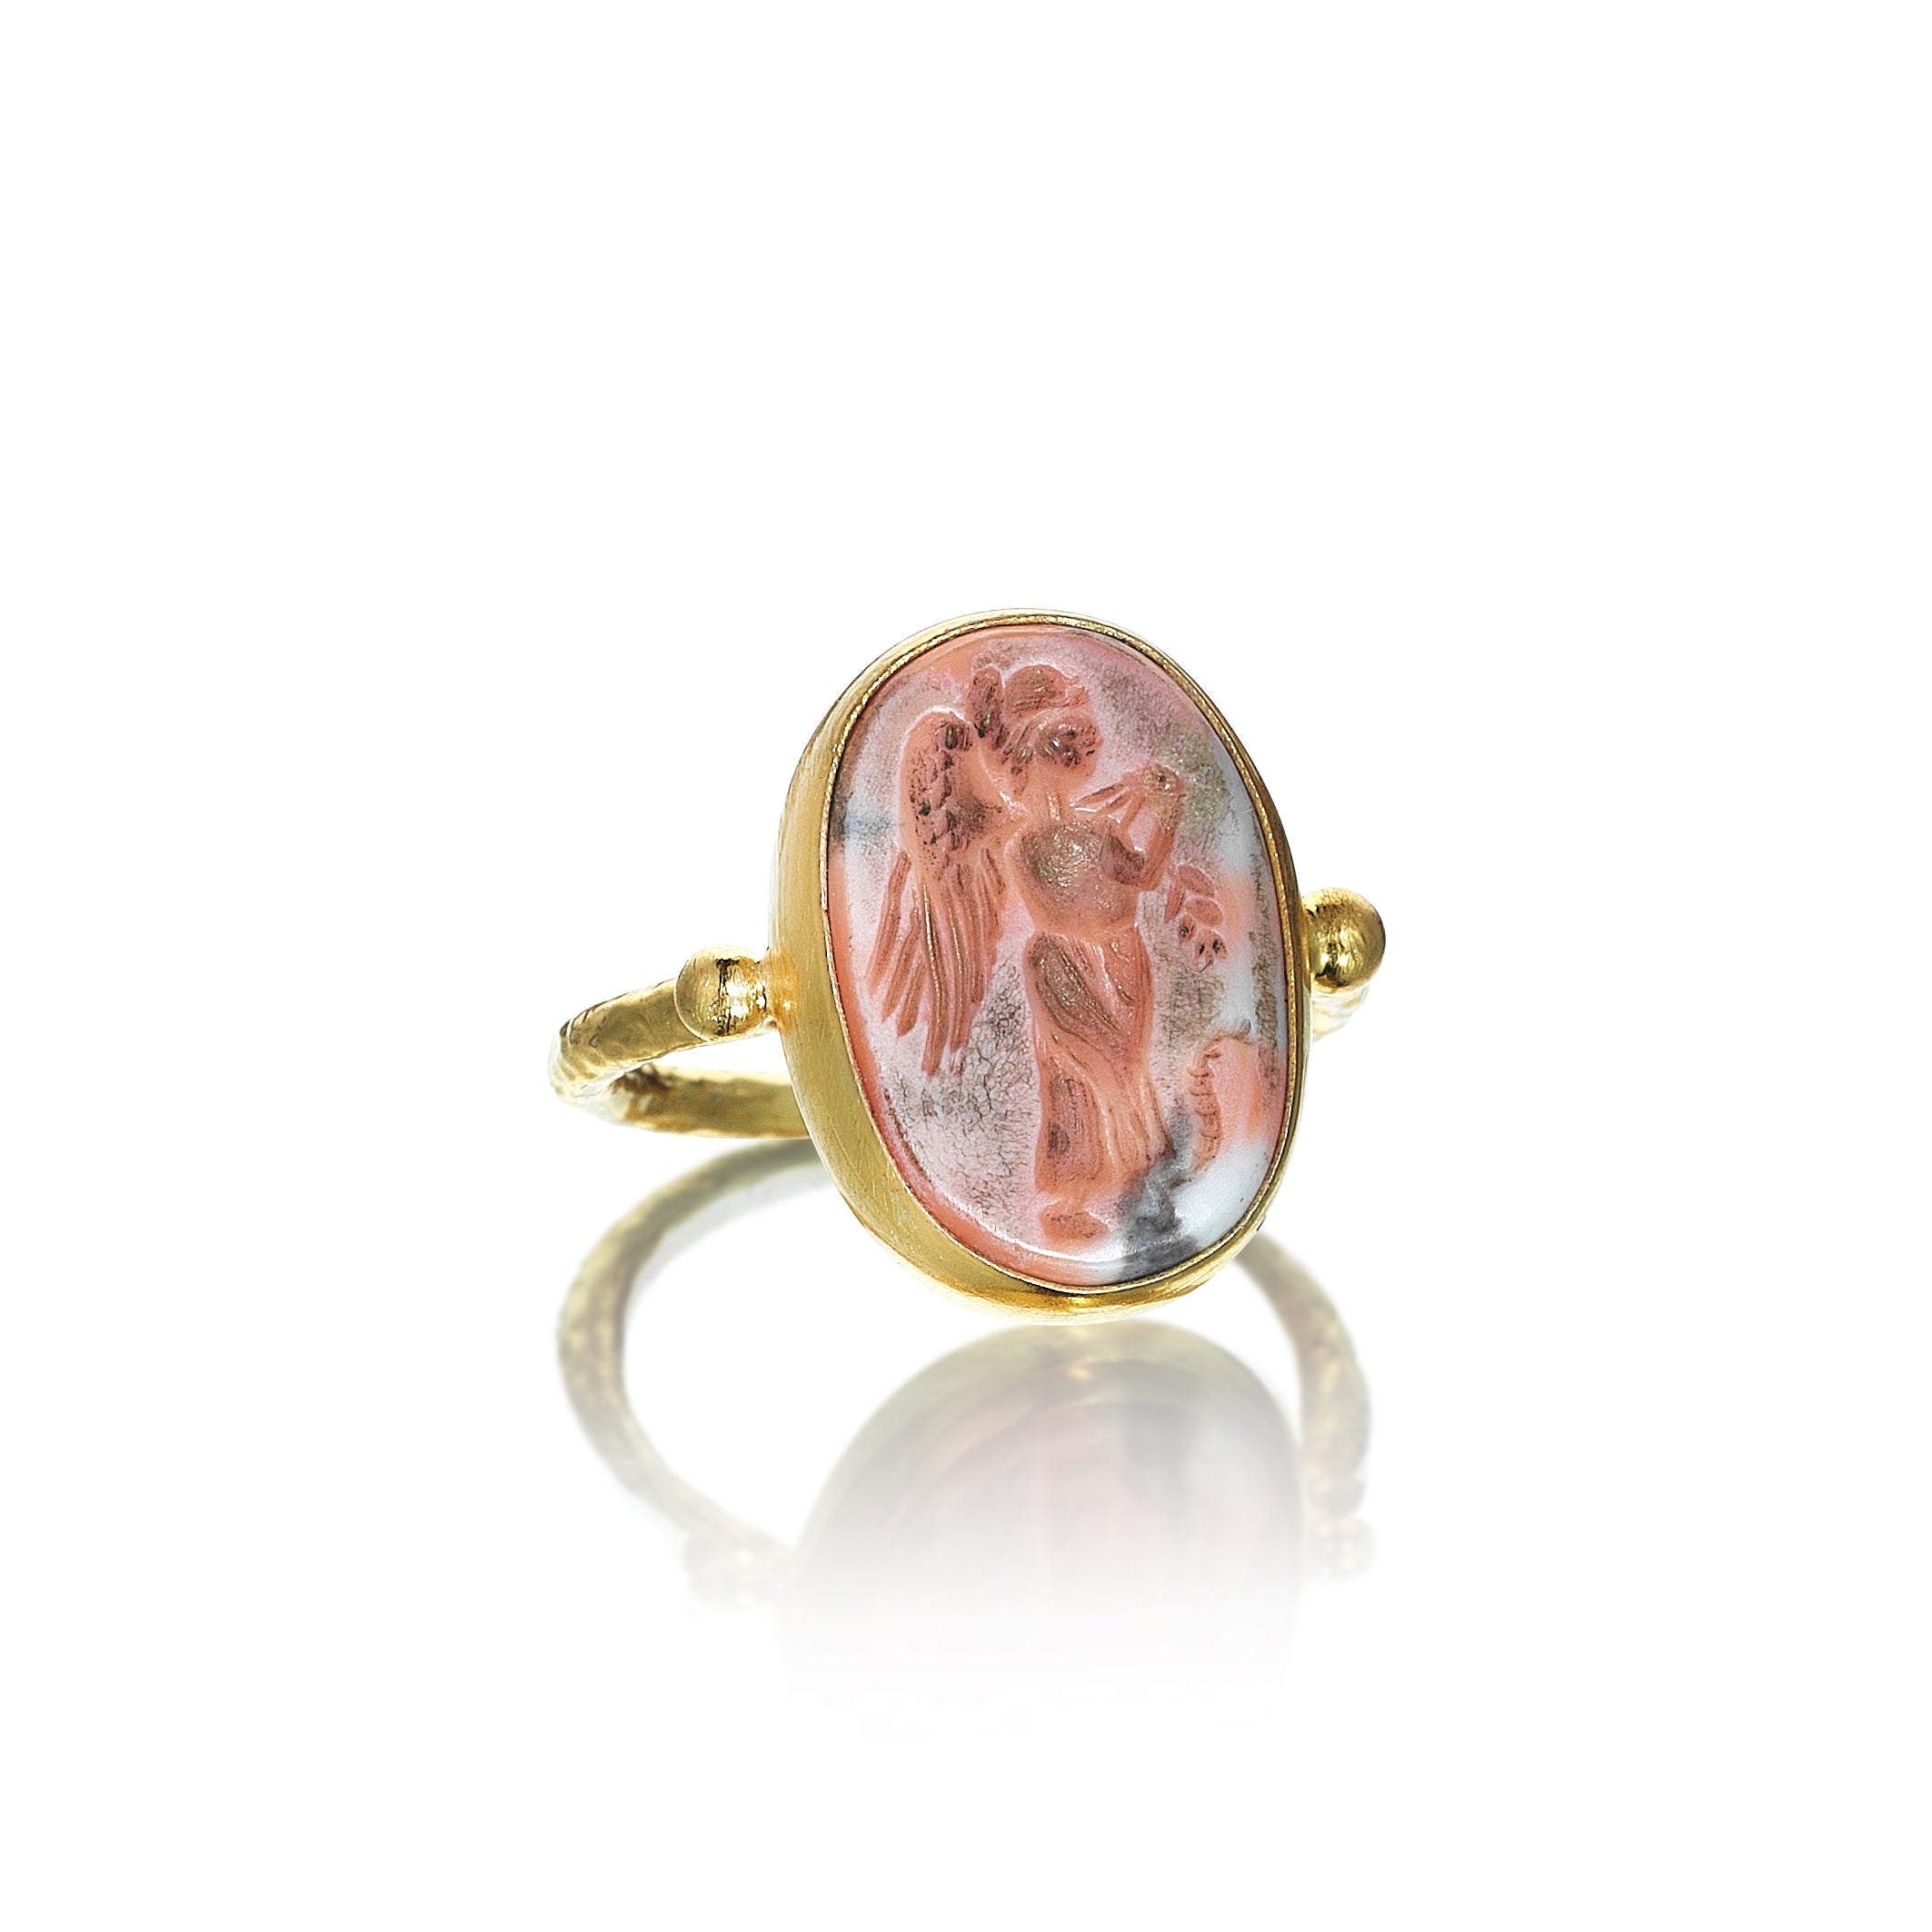 The Archangel Ring